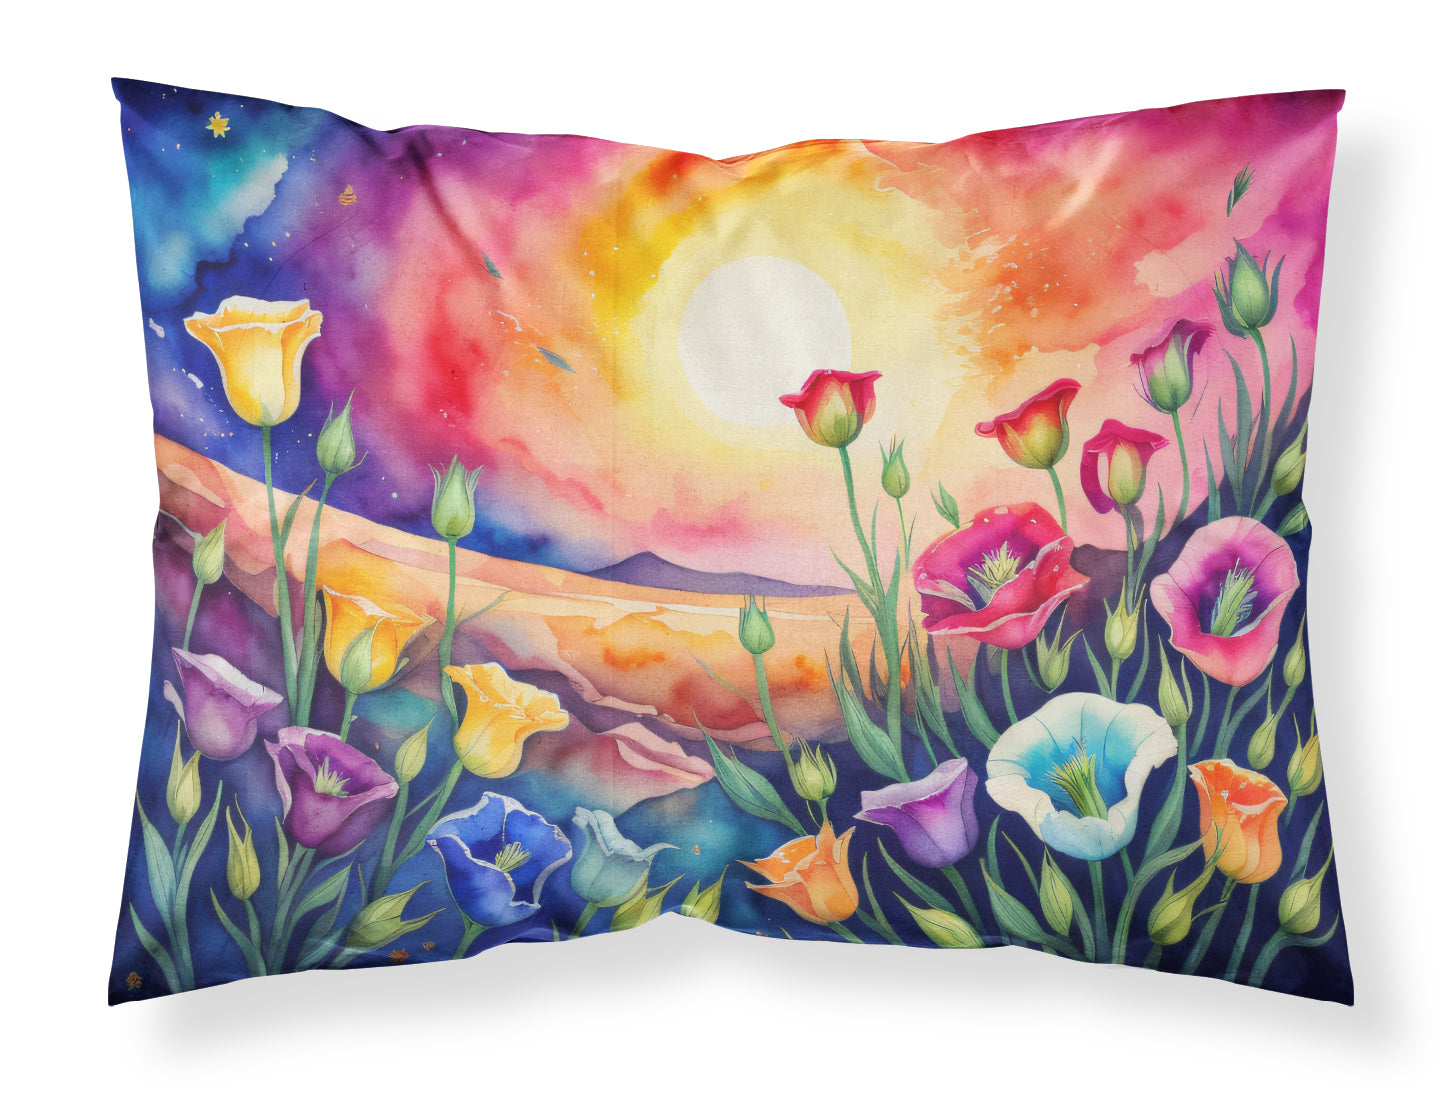 Buy this Lisianthus in Color Fabric Standard Pillowcase